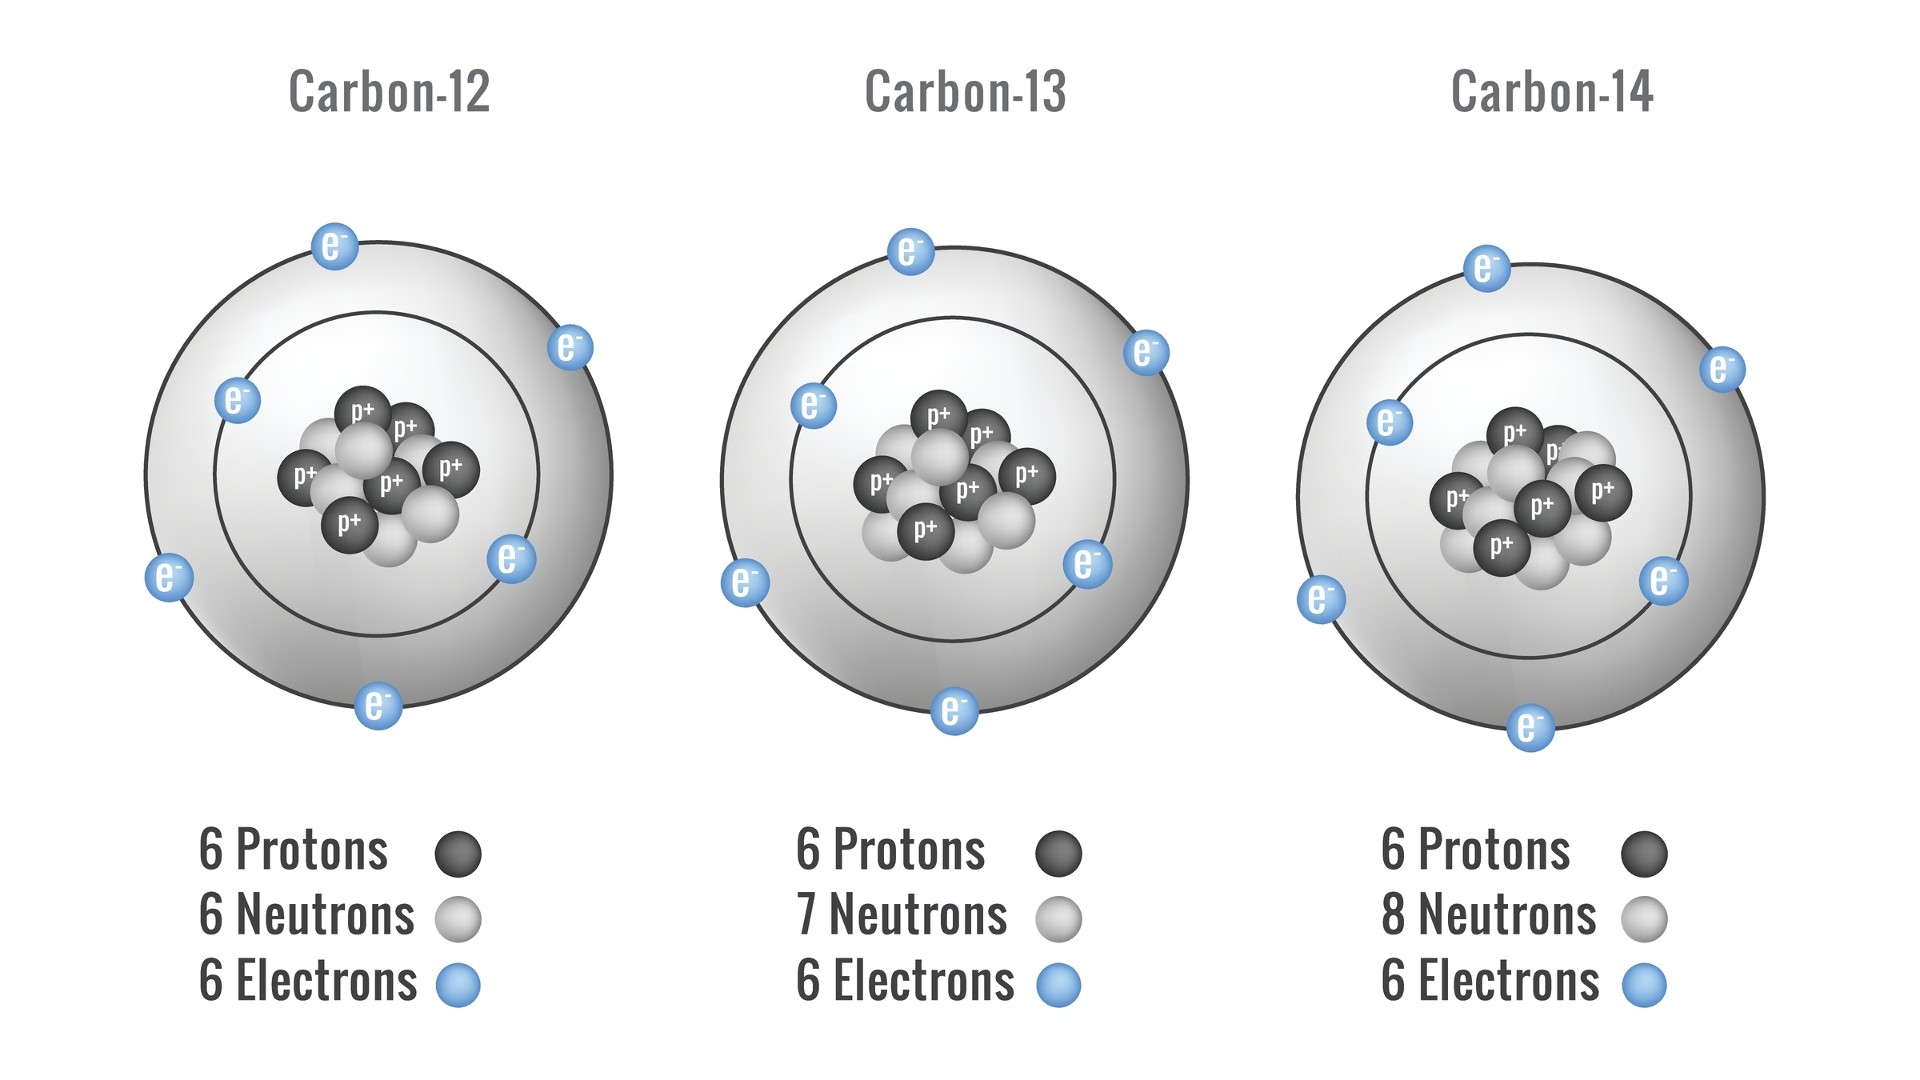 Isotopes of Carbon. Atomic Structure of Carbon-12, Carbon-13 and Carbon-14. Carbon isotopes come in three forms. Nandalal Sarkar via Shutterstock